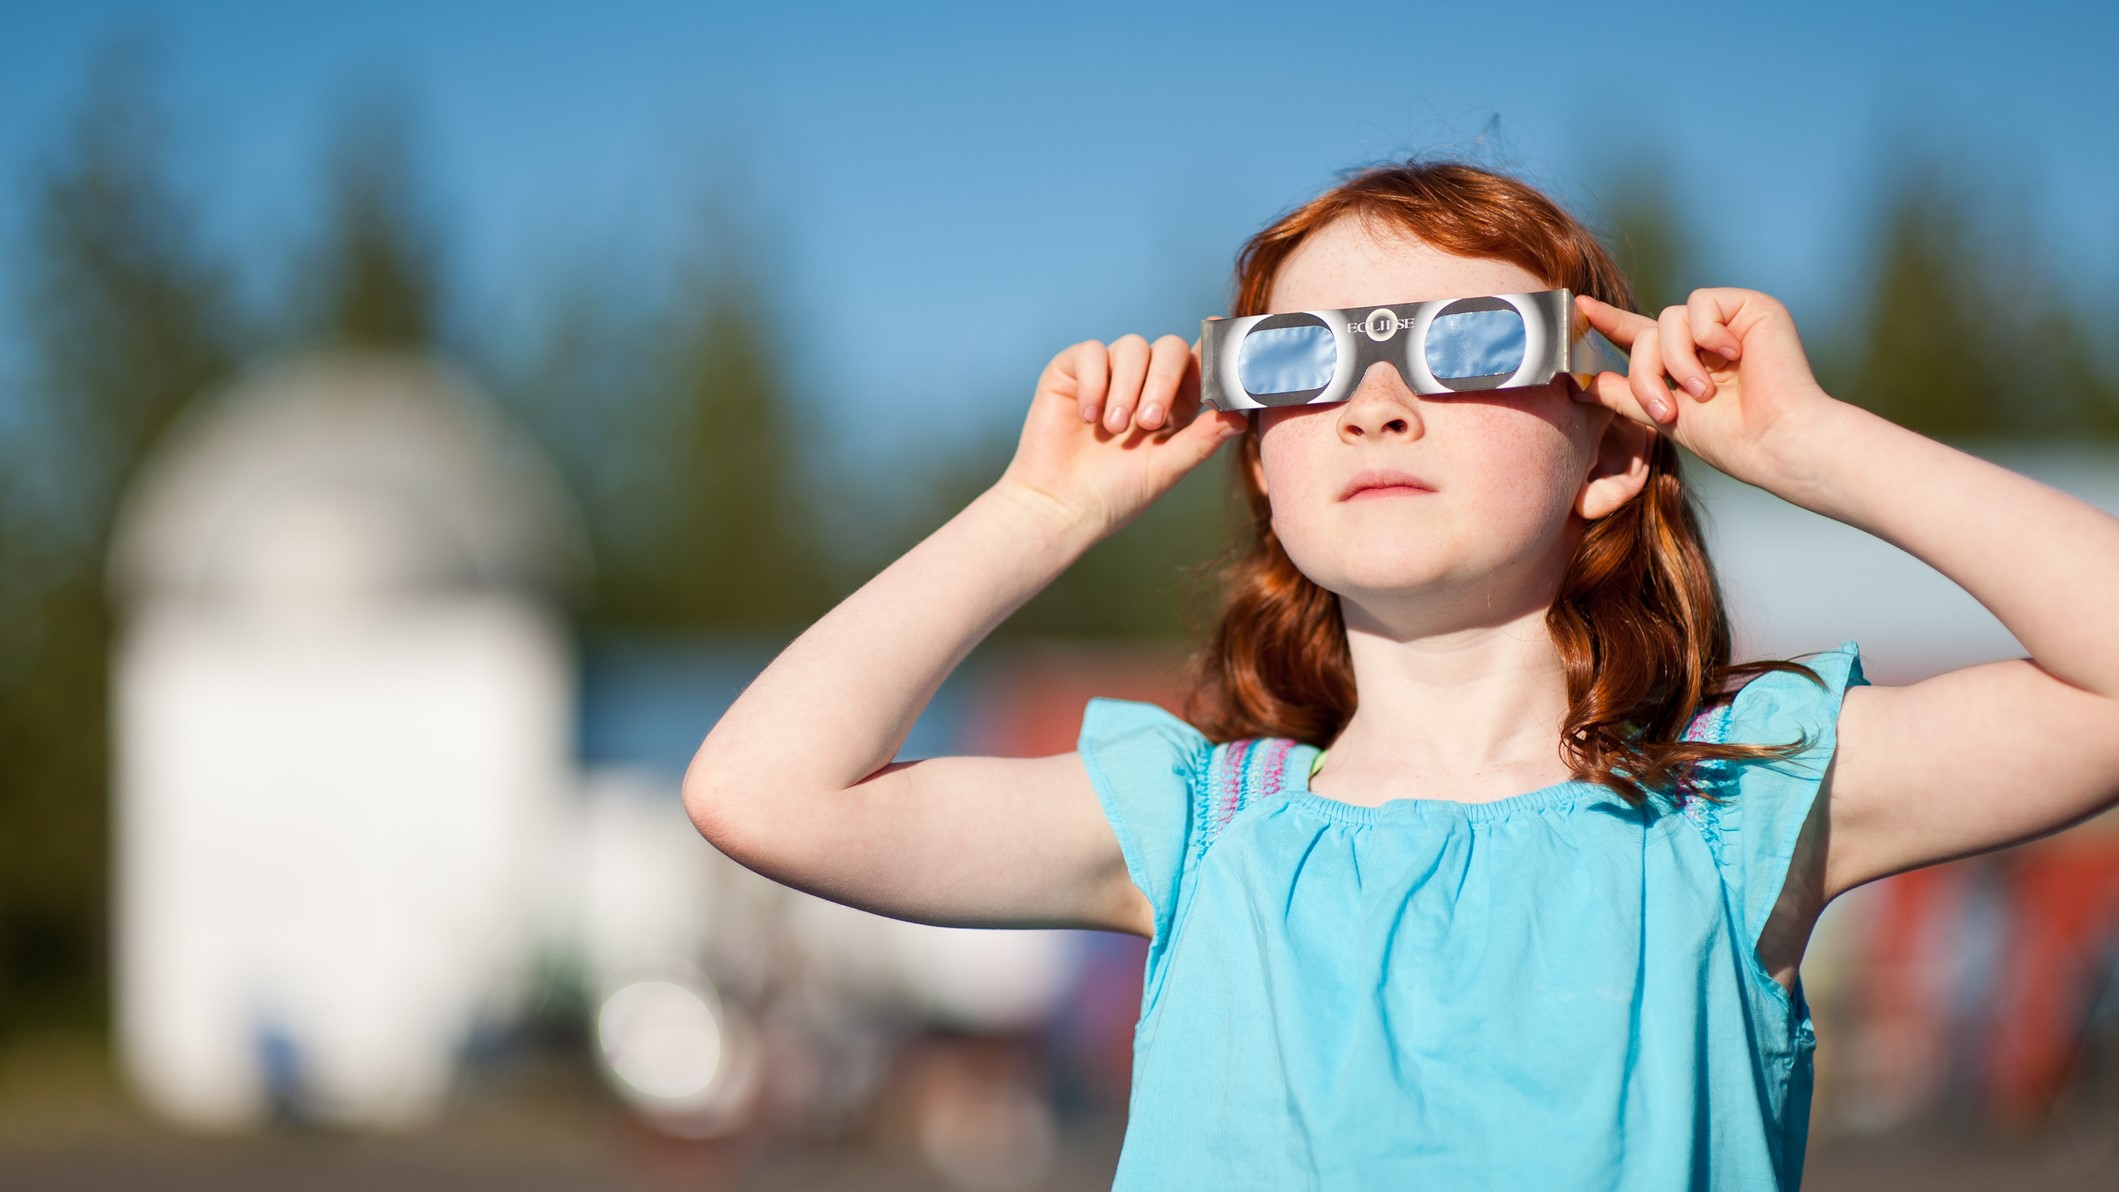 A girl in a blue top holds a pair of eclipse glasses on her face while watching an eclipse.